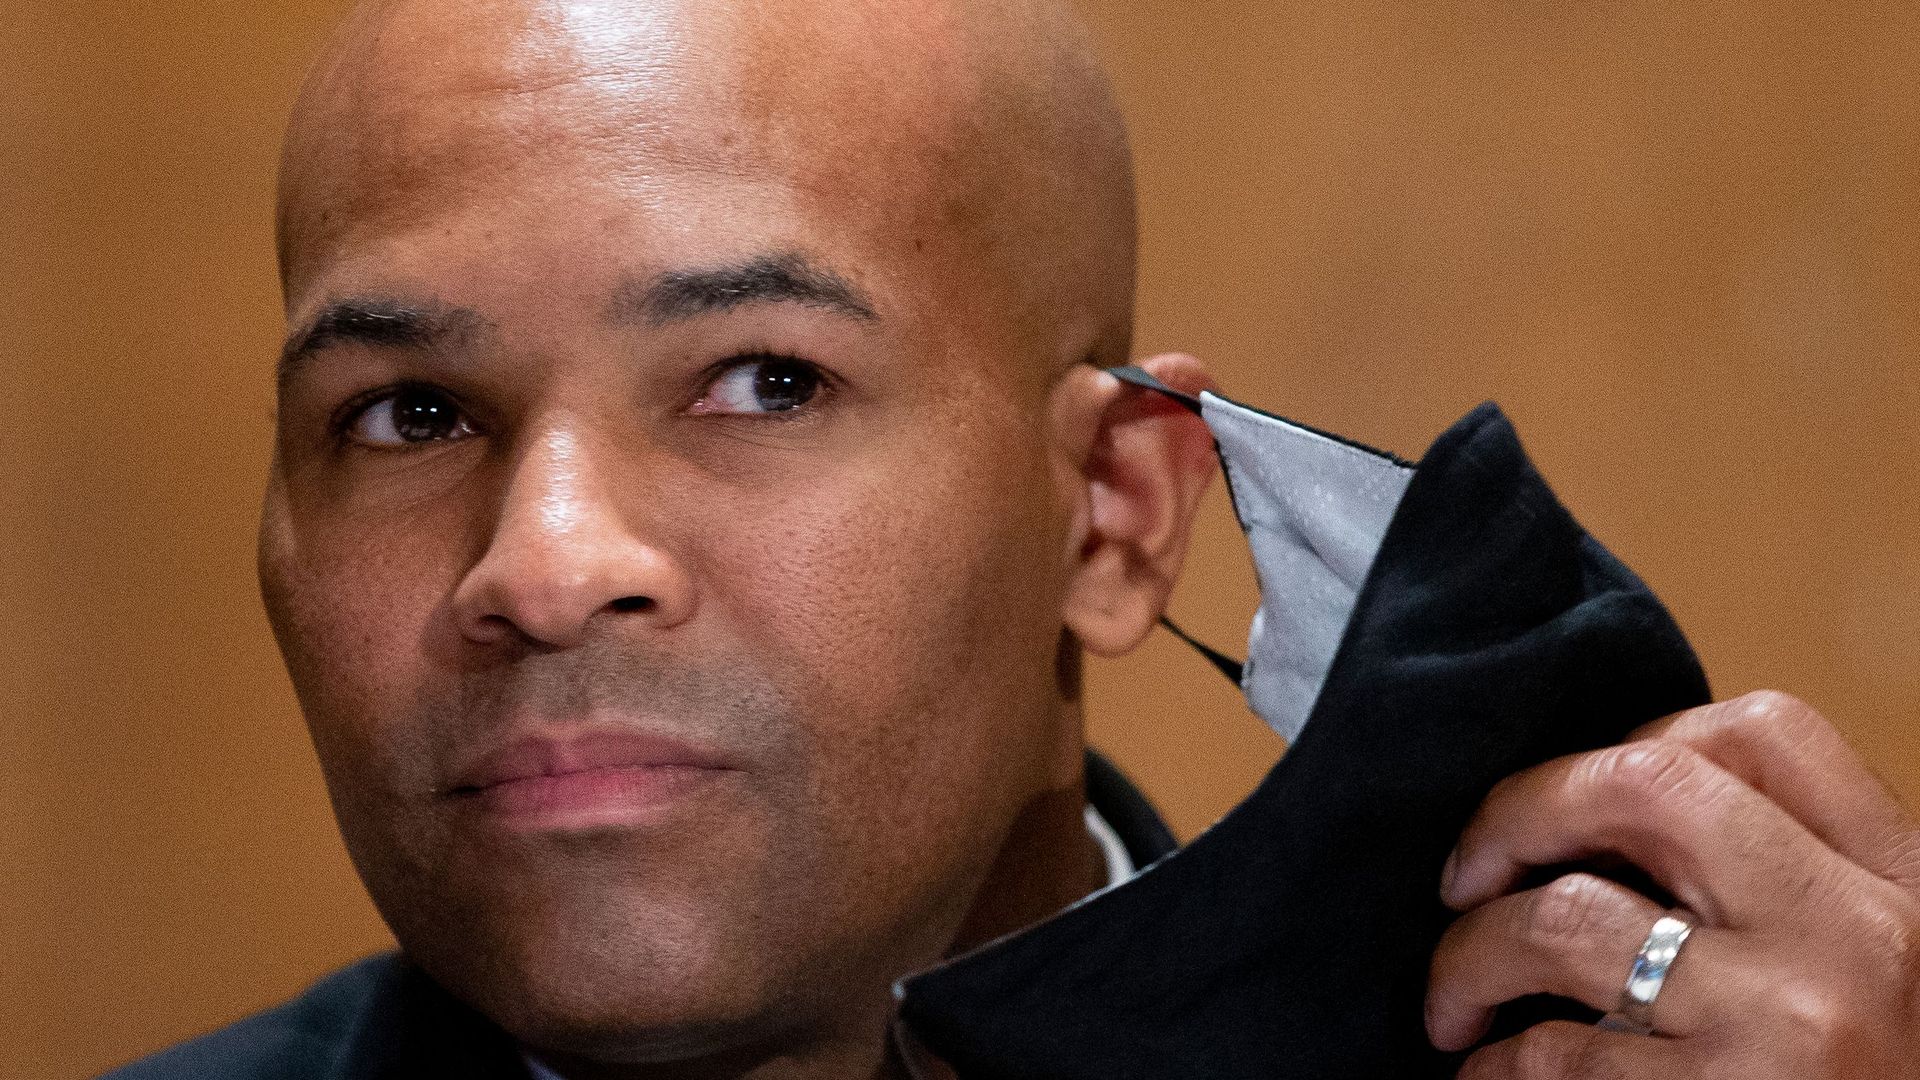 US Surgeon General Jerome Adams takes off his face mask as he appears before a Senate Health, Education, Labor and Pensions Committee hearing on September 9